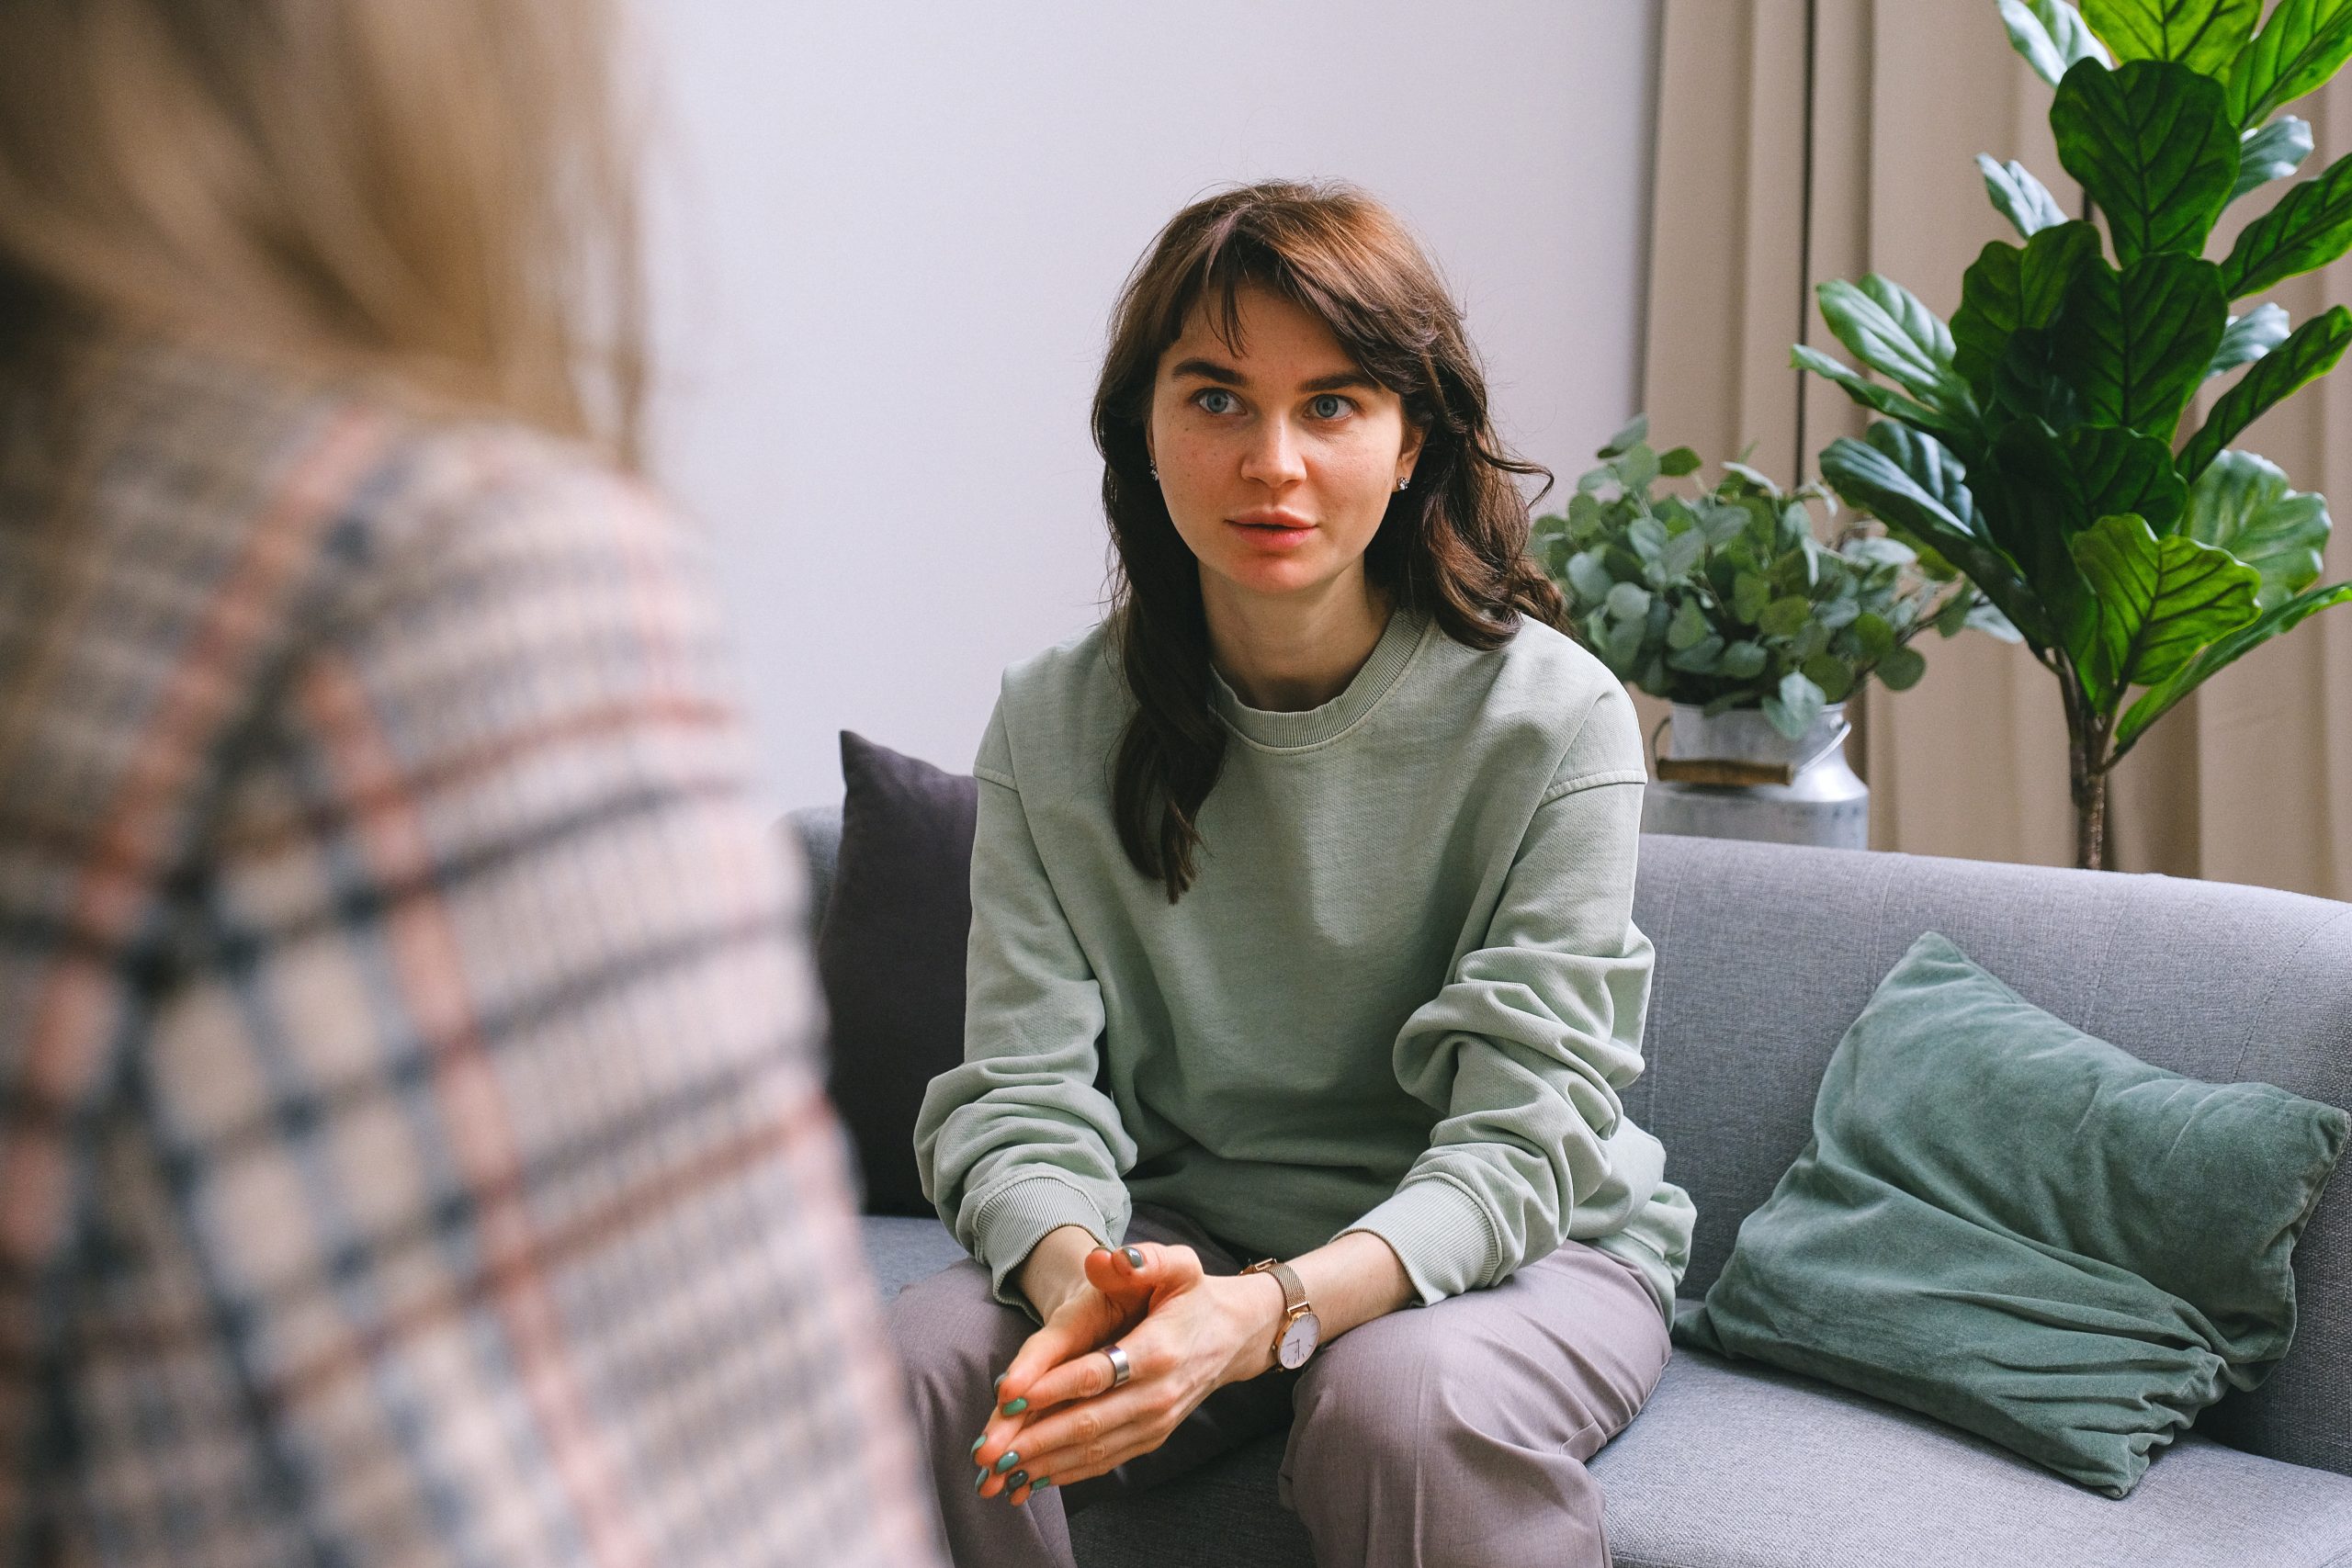 client in counselling session with therapist